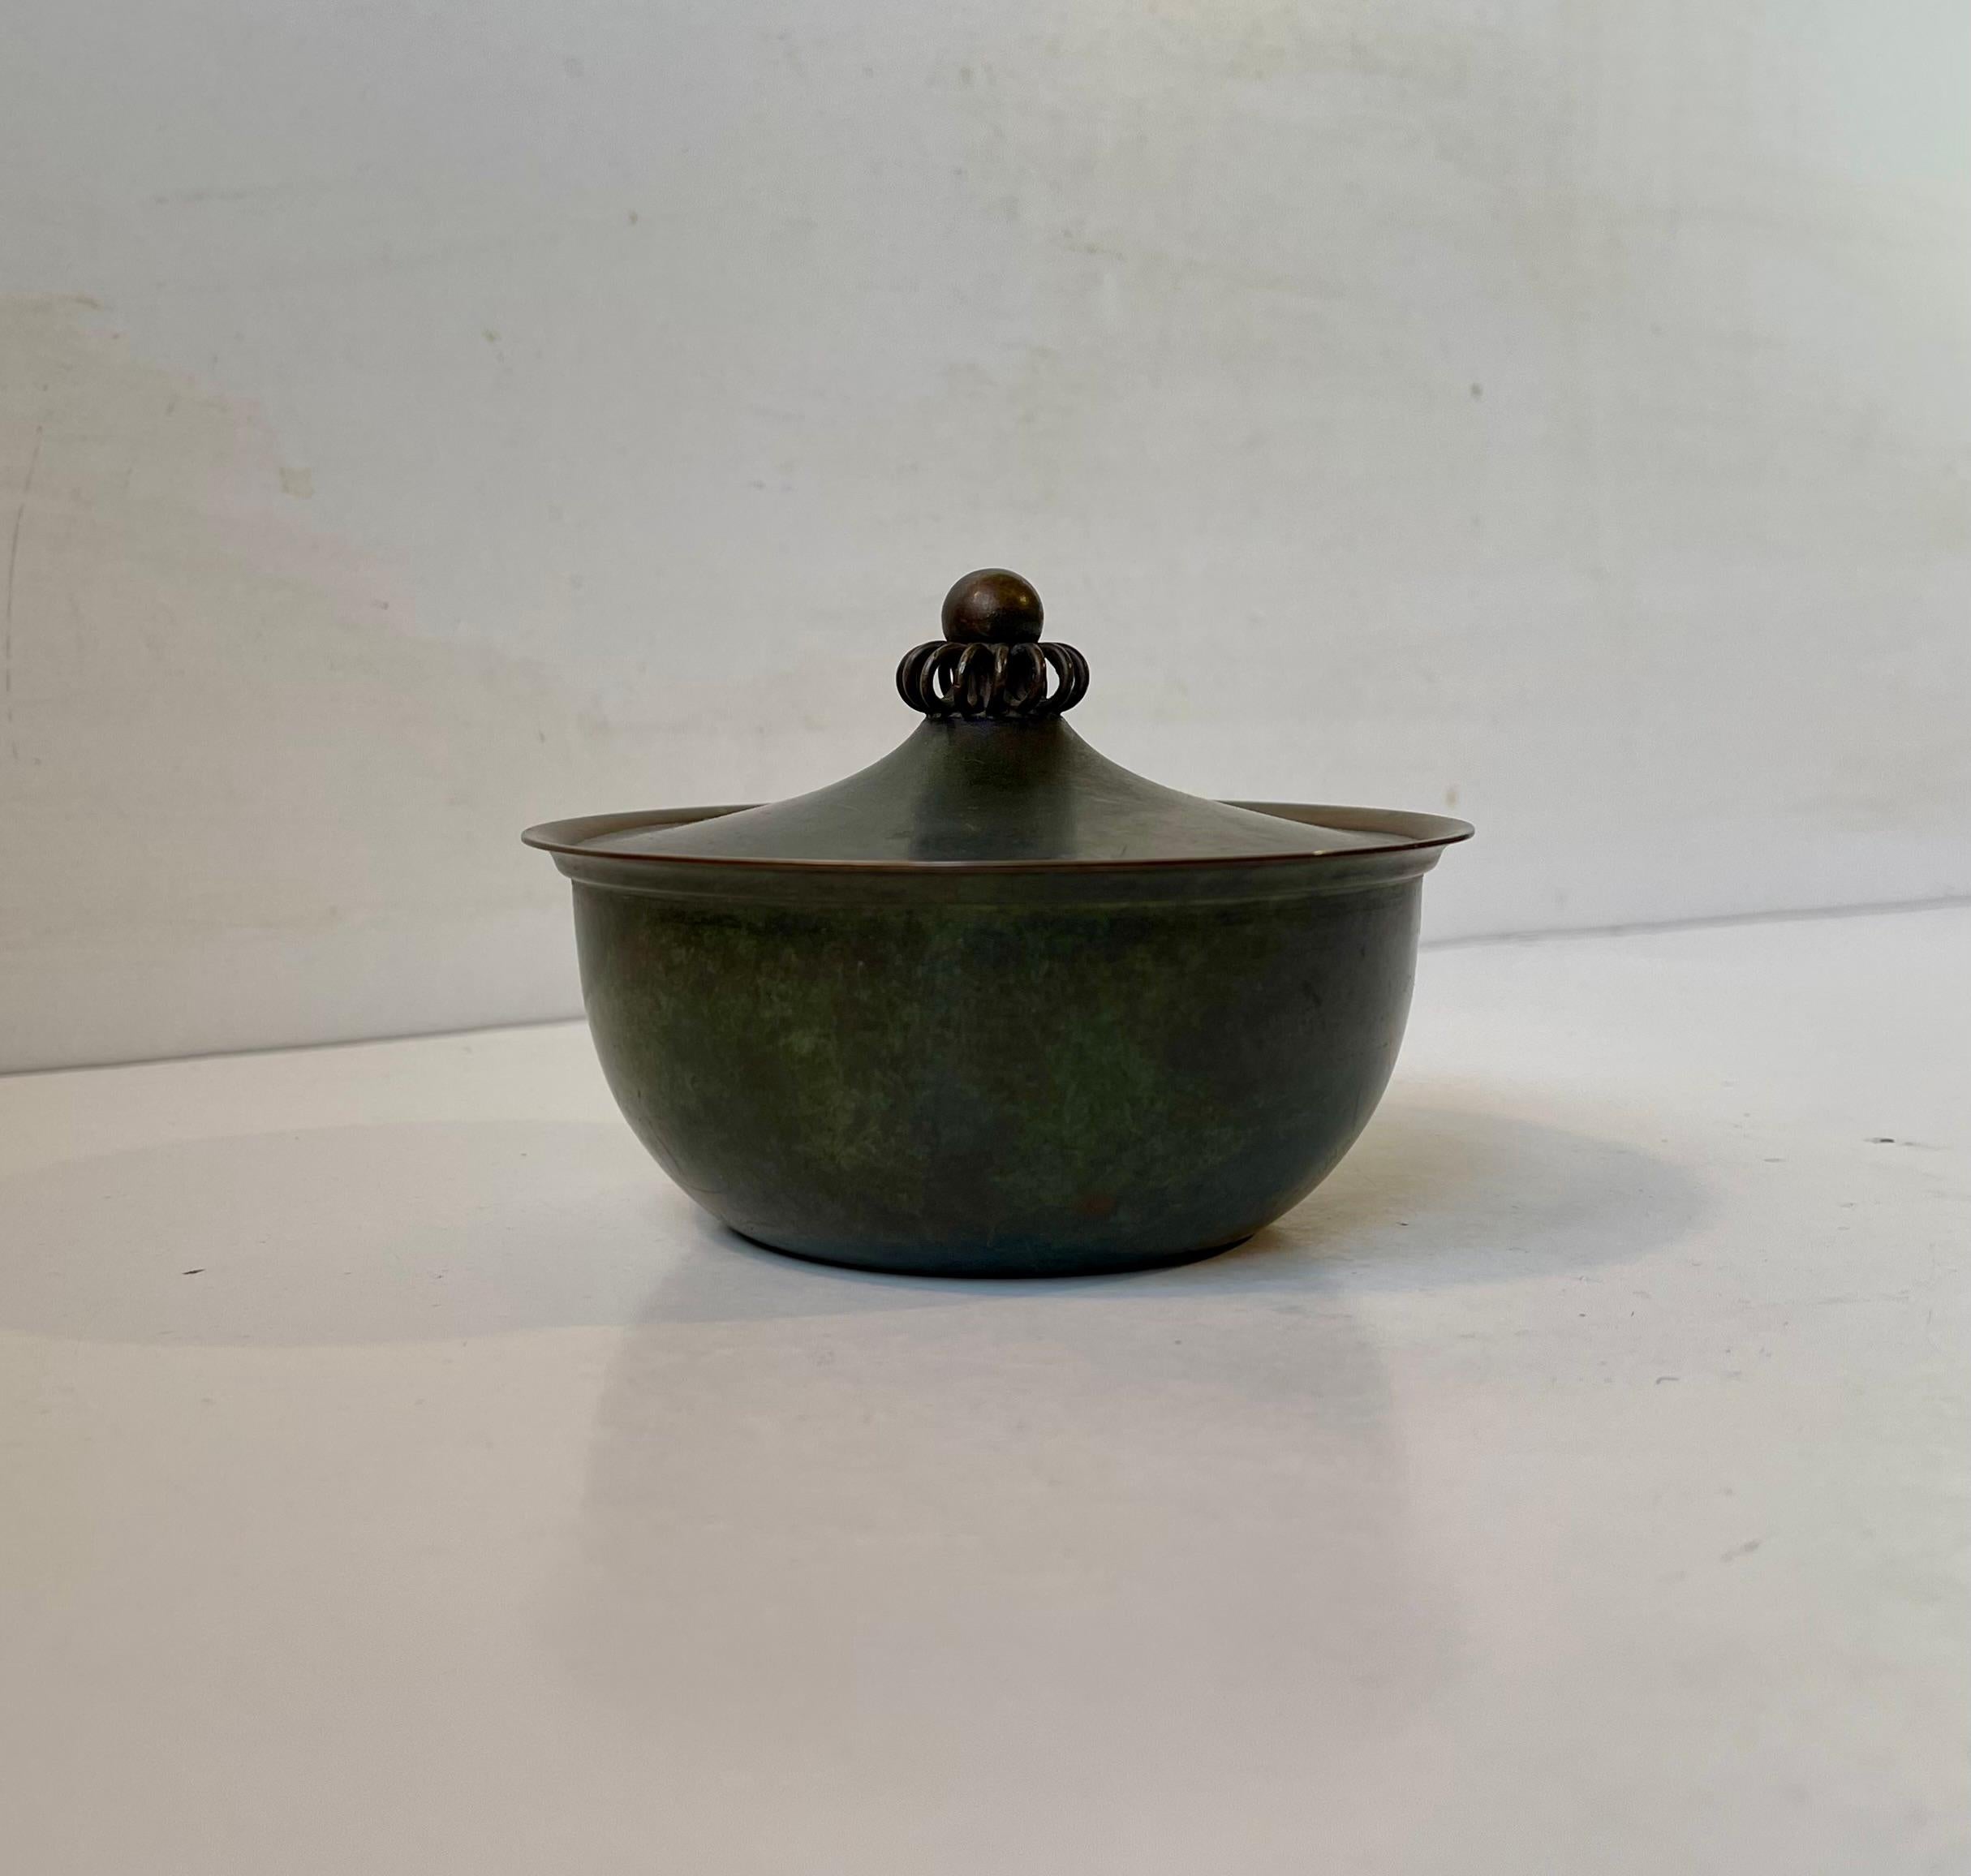 Early green patinated jar or trinket in bronze designed by Just Andersen and manufactured in the early 1930s. Ornate Josef Frank inspired handle to the lid. Fully signed and numbered to its base. Measurements: D: 11 cm, H: 8 cm. Small dent to the